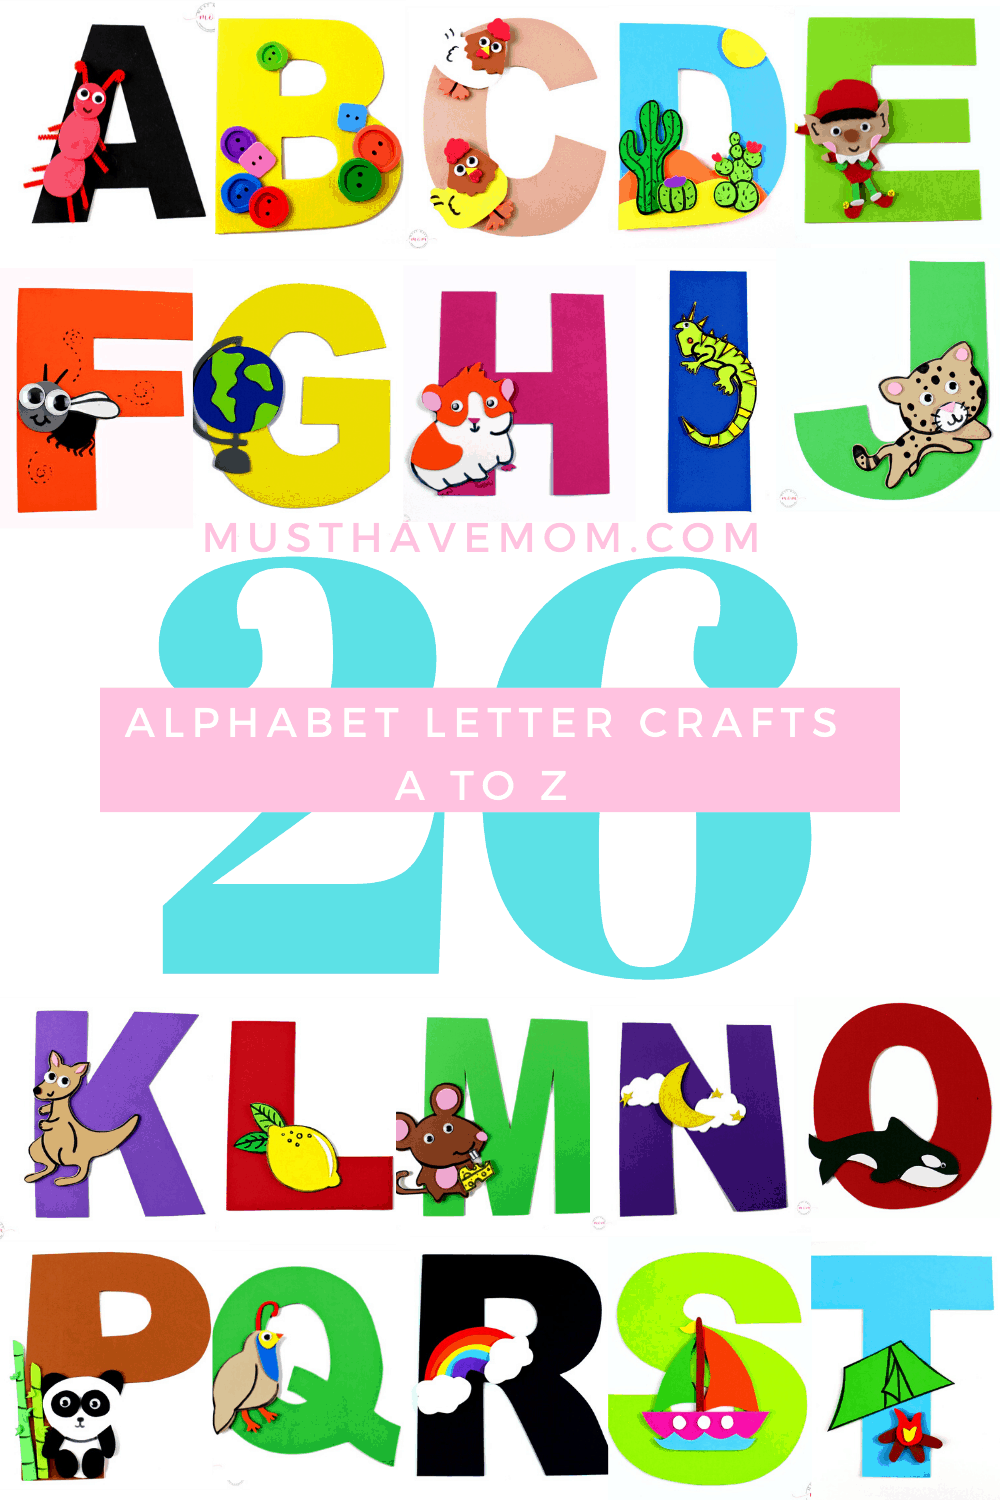 A to Z Alphabet Letter Crafts With Free Printables!